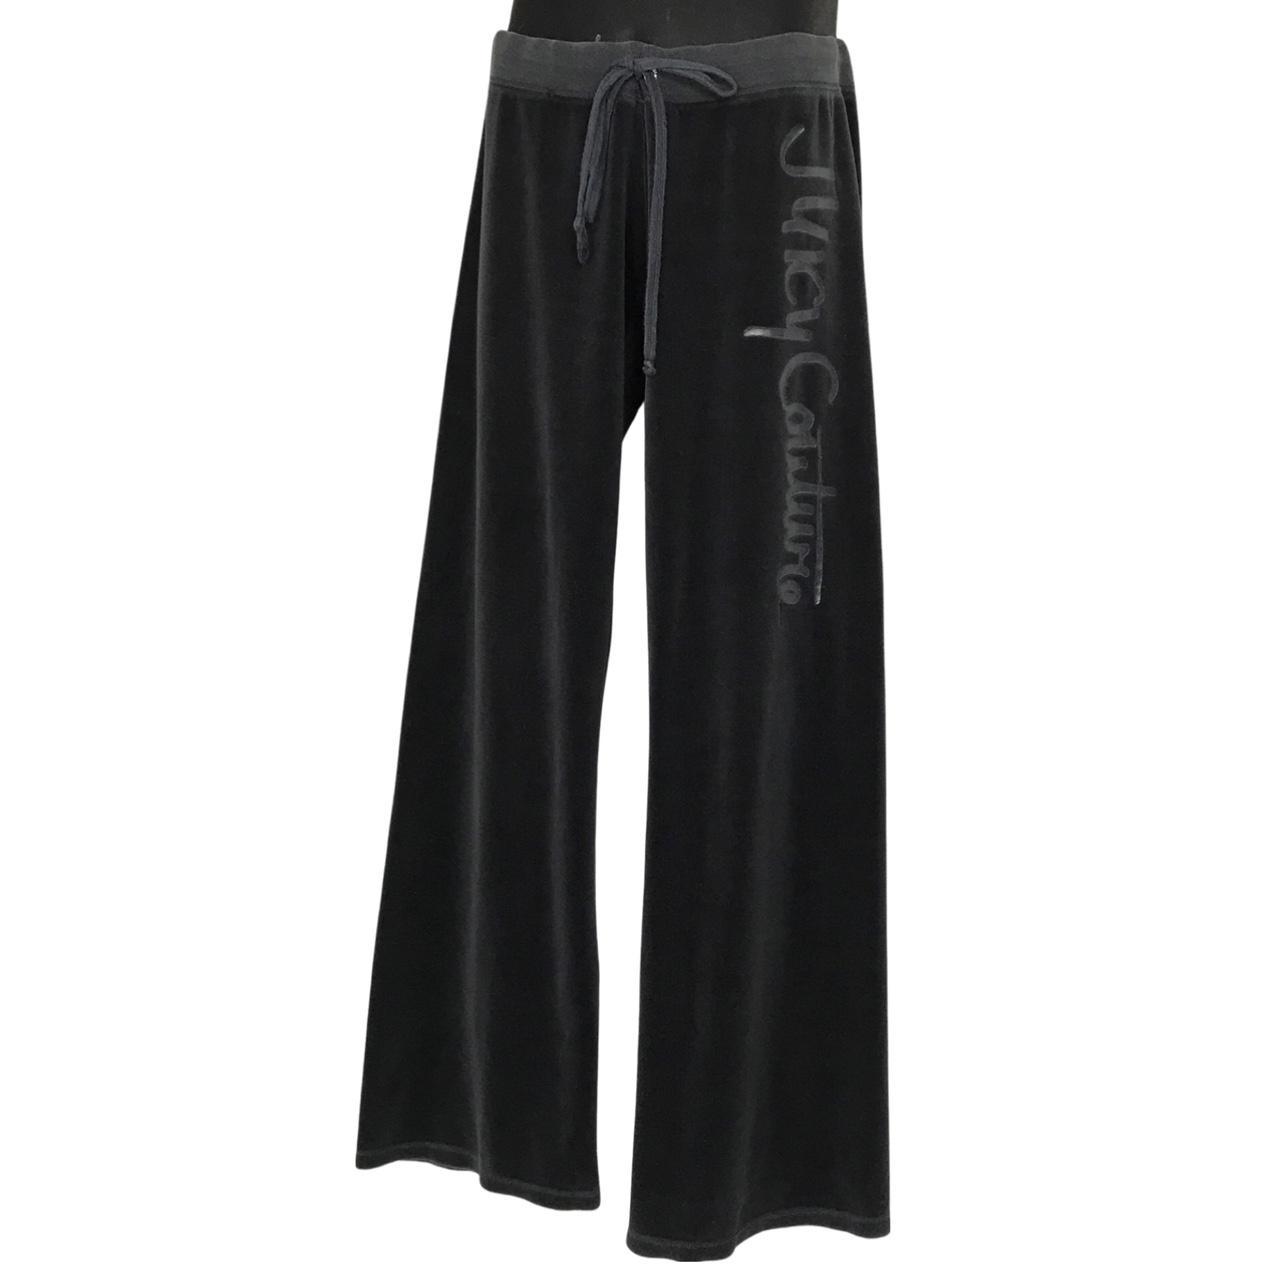 Juicy Couture Women's Black Joggers-tracksuits